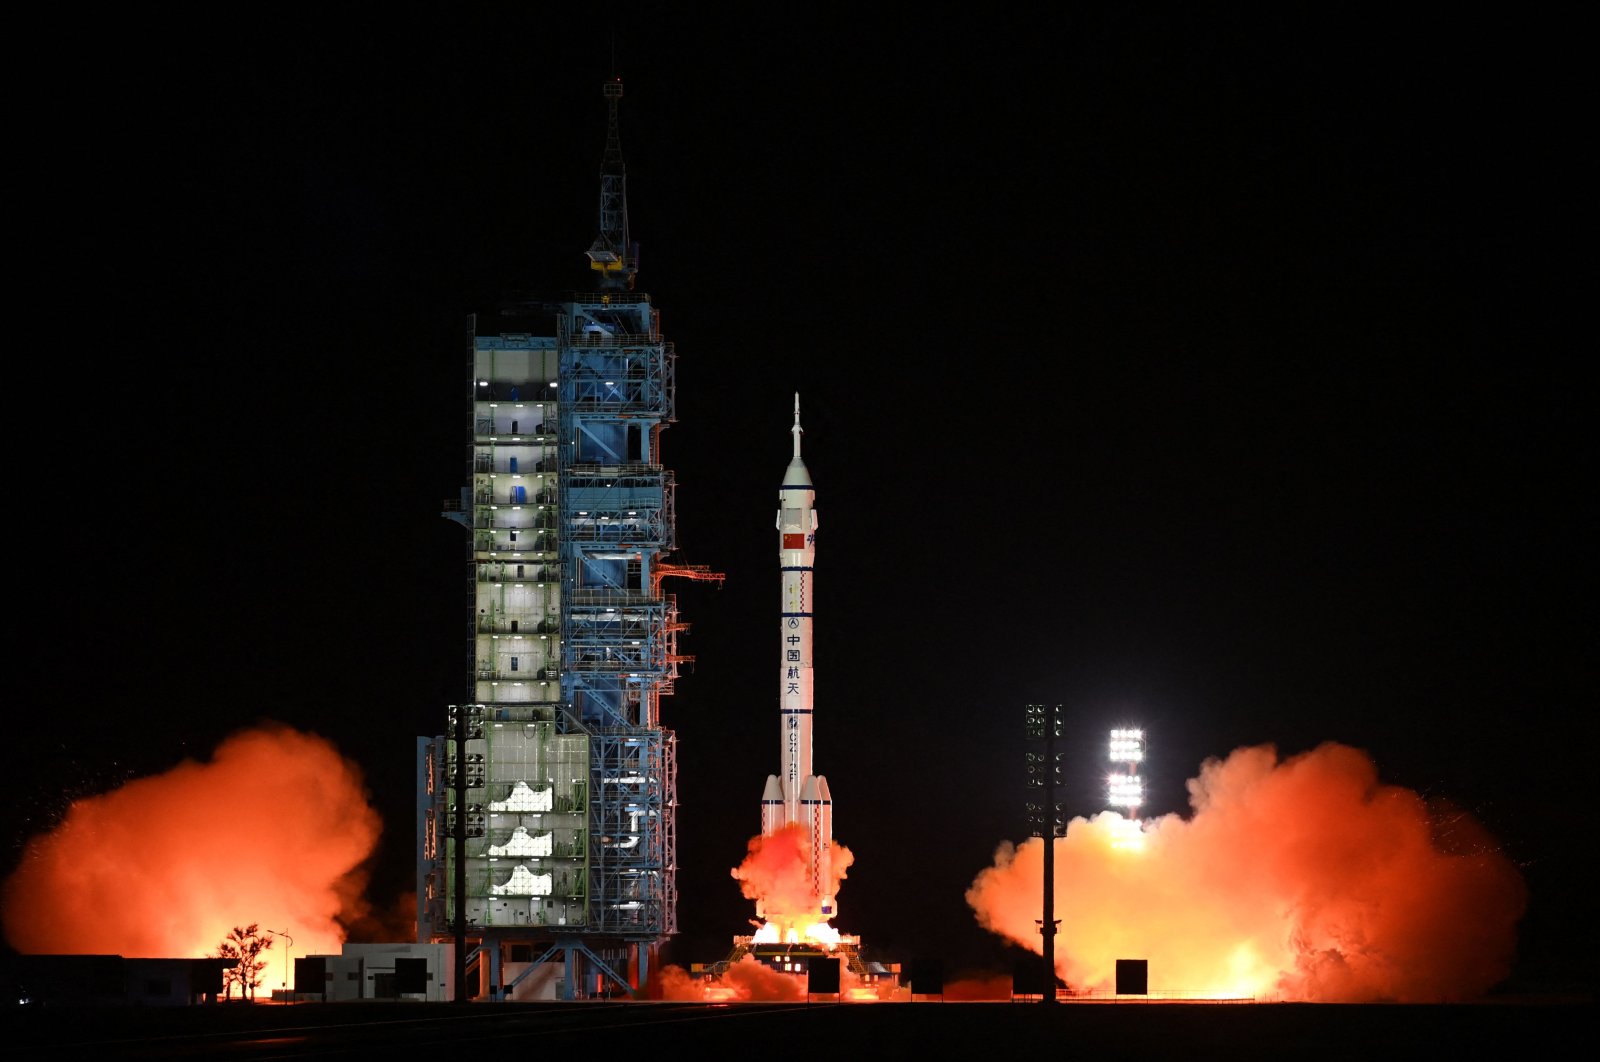 A Long March-2F carrier rocket, carrying the Shenzhou-15 spacecraft with three astronauts, lifts off from the Jiuquan Satellite Launch Center in Gansu Province, China, Nov. 29, 2022. (AFP Photo)